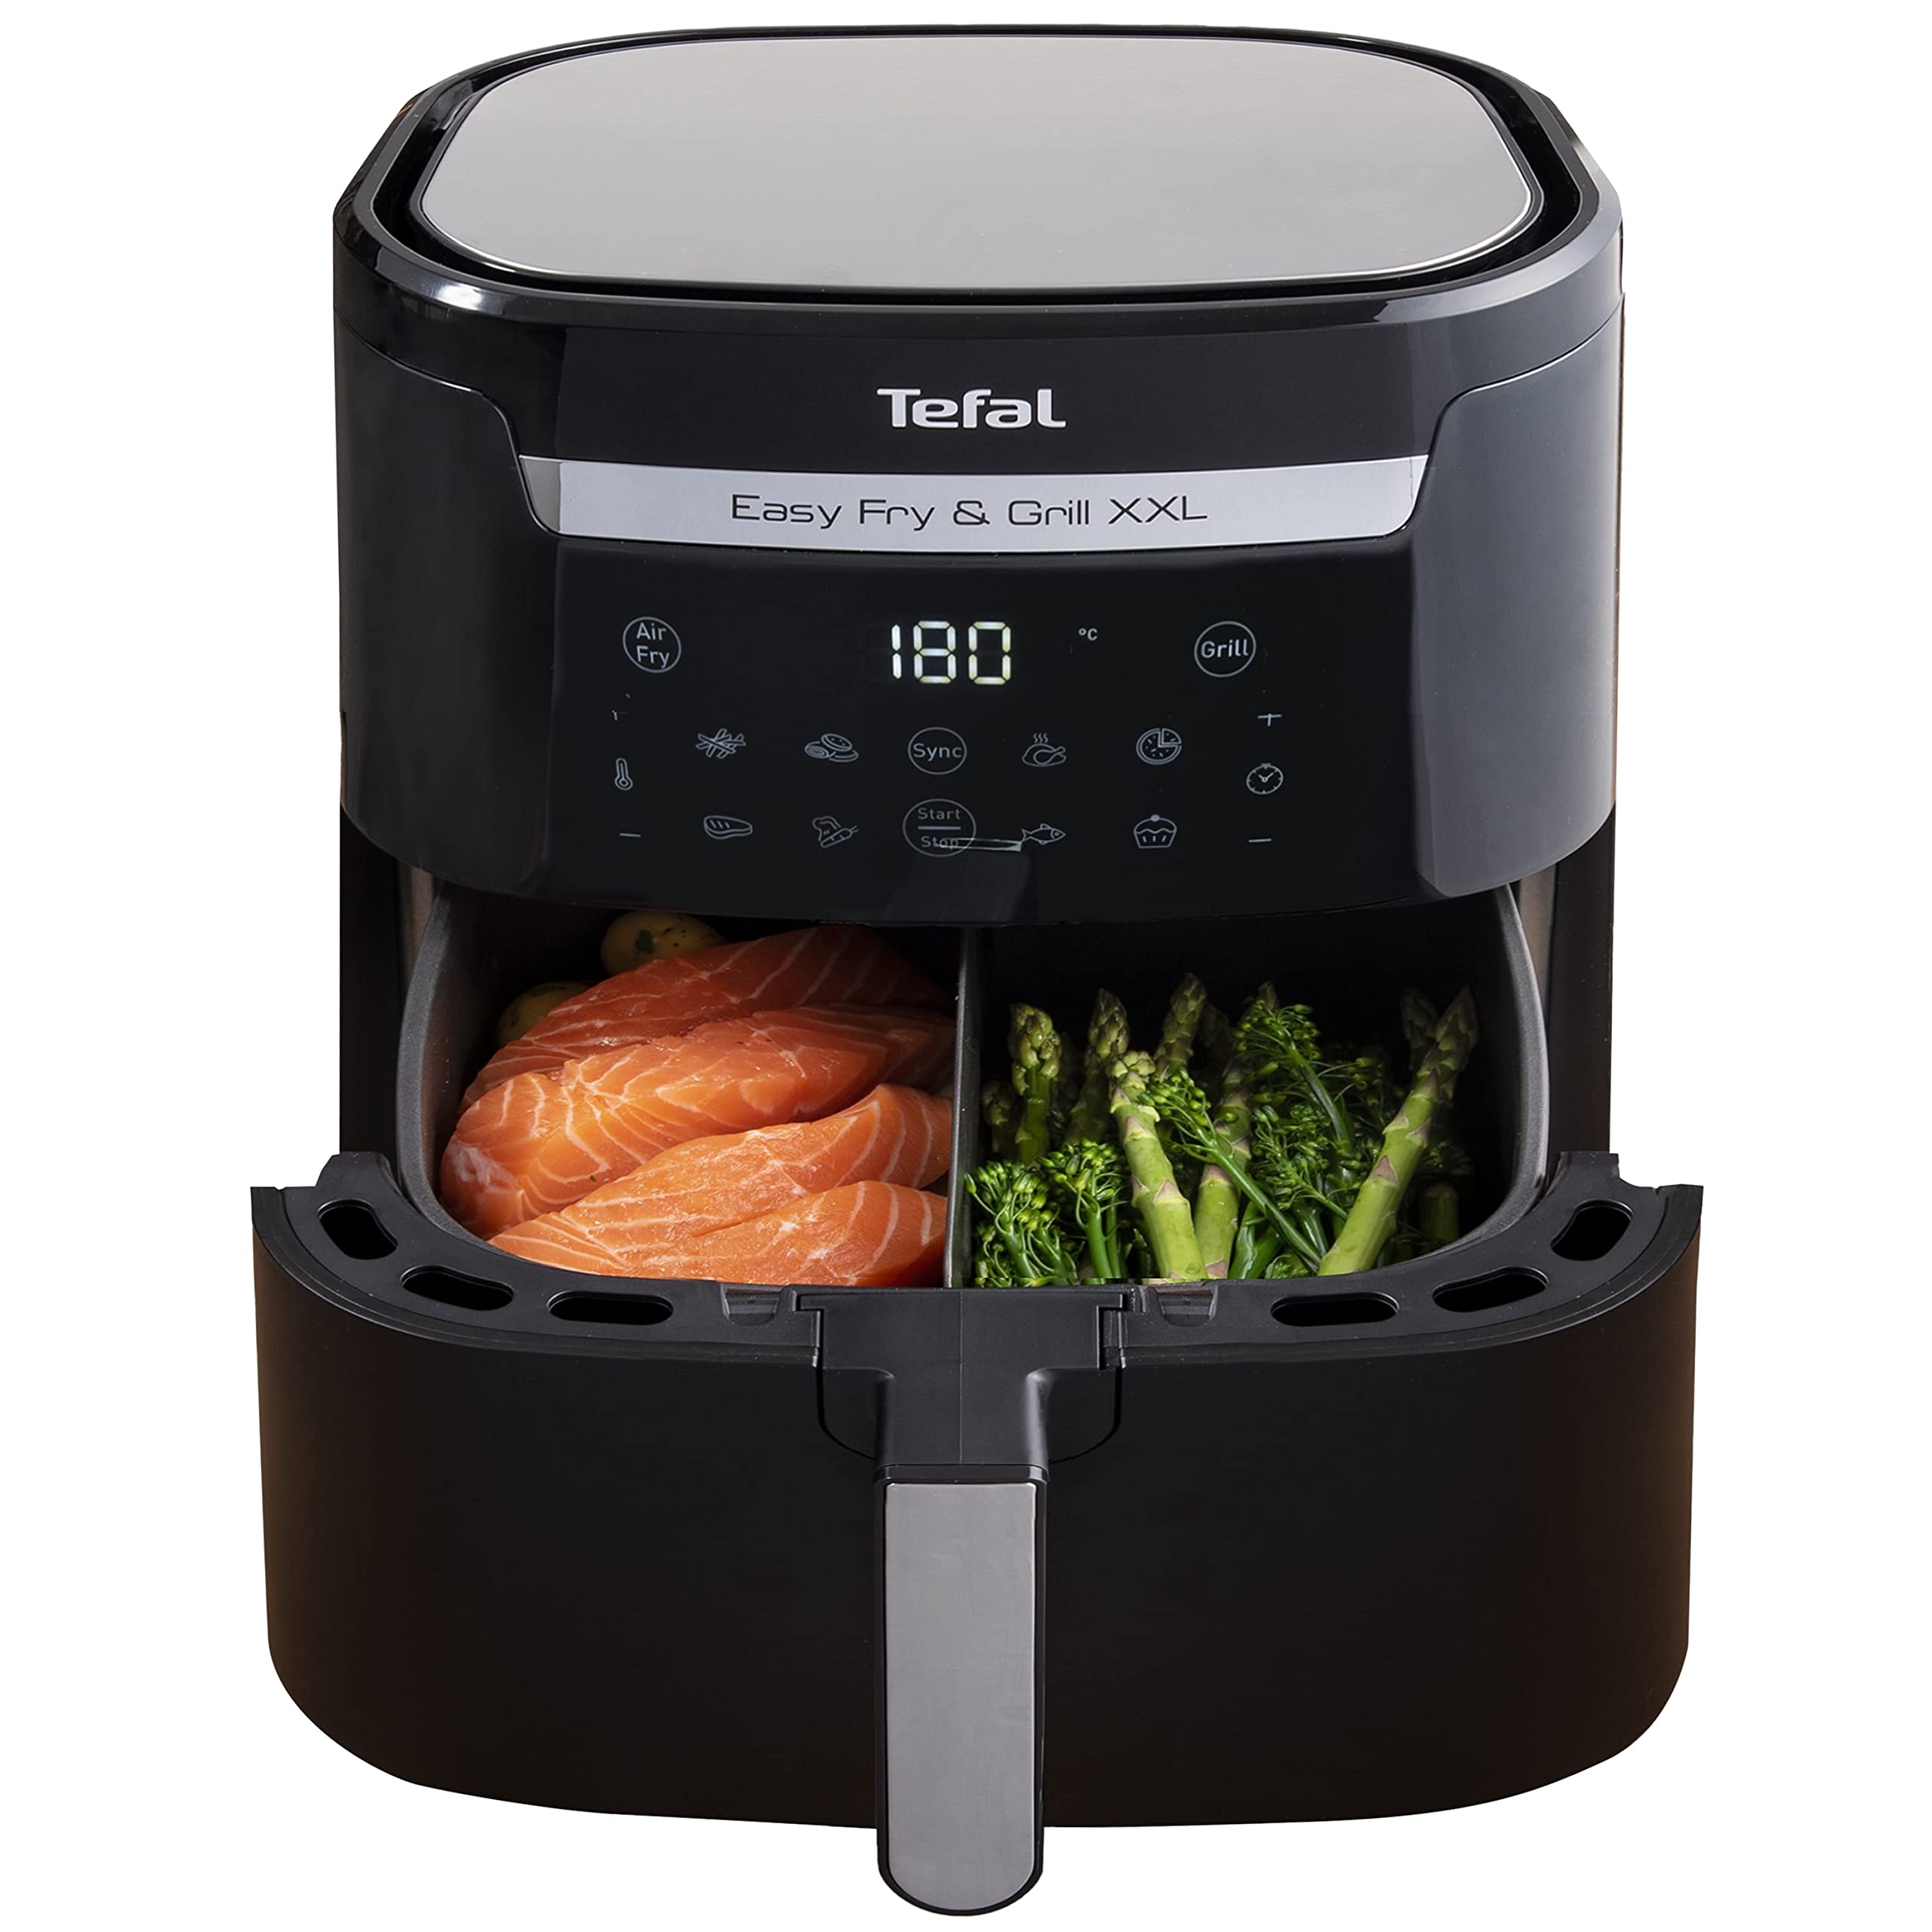 Tefal Easy Fry XXL 2in1 Digital Dual Air Fryer & Grill, 6.5L or 3.25L x2  Drawer Capacity, 8 Programs, Black, EY801827,  Exclusive, 1830 W :  : Home & Kitchen